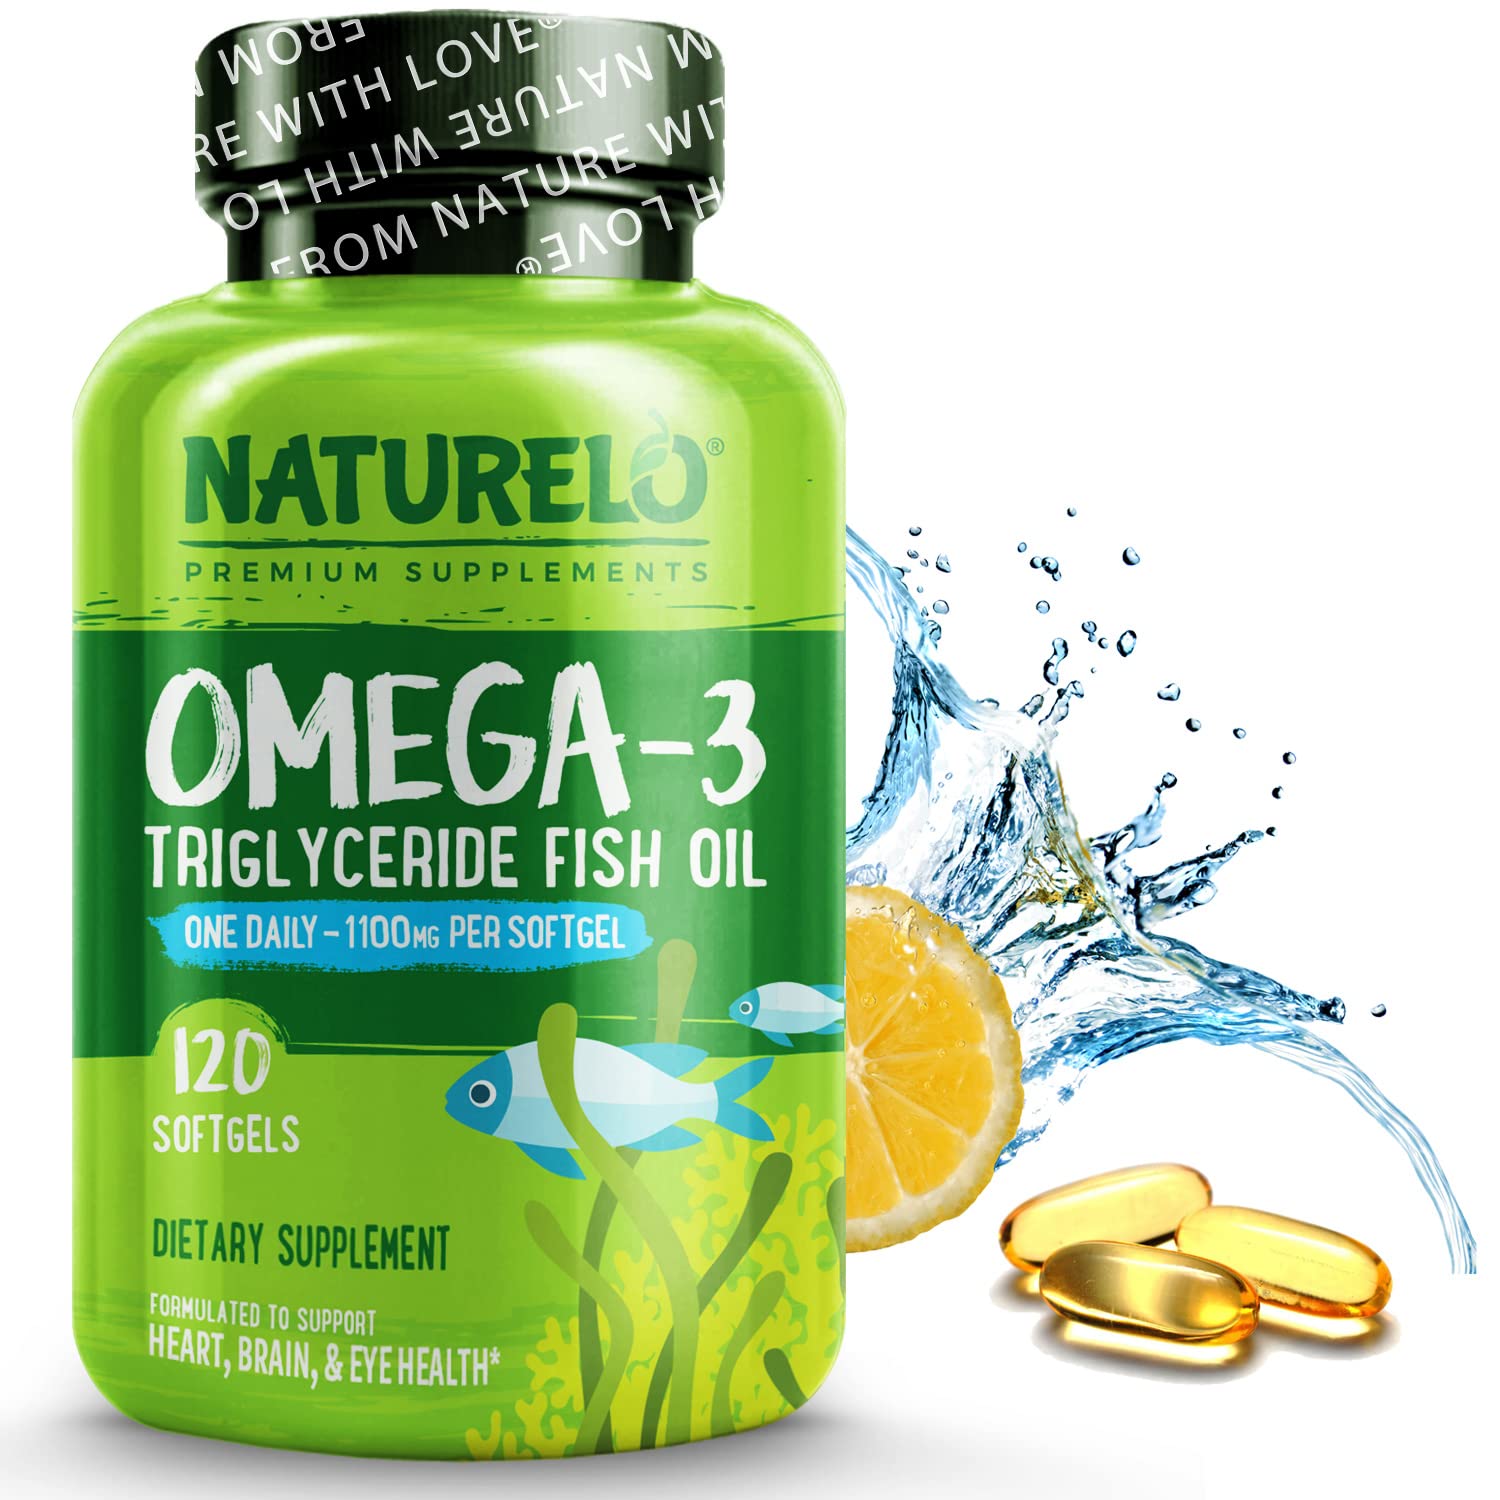 NATURELO Omega-3 Fish Oil Supplement - EPA + DHA - 1100 mg Triglyceride Omega-3 per Gel - One A Day - for Heart, Eye, Brain, Joint Health - No Burps - Lemon Flavor - 120 Softgels | 4 Month Supply